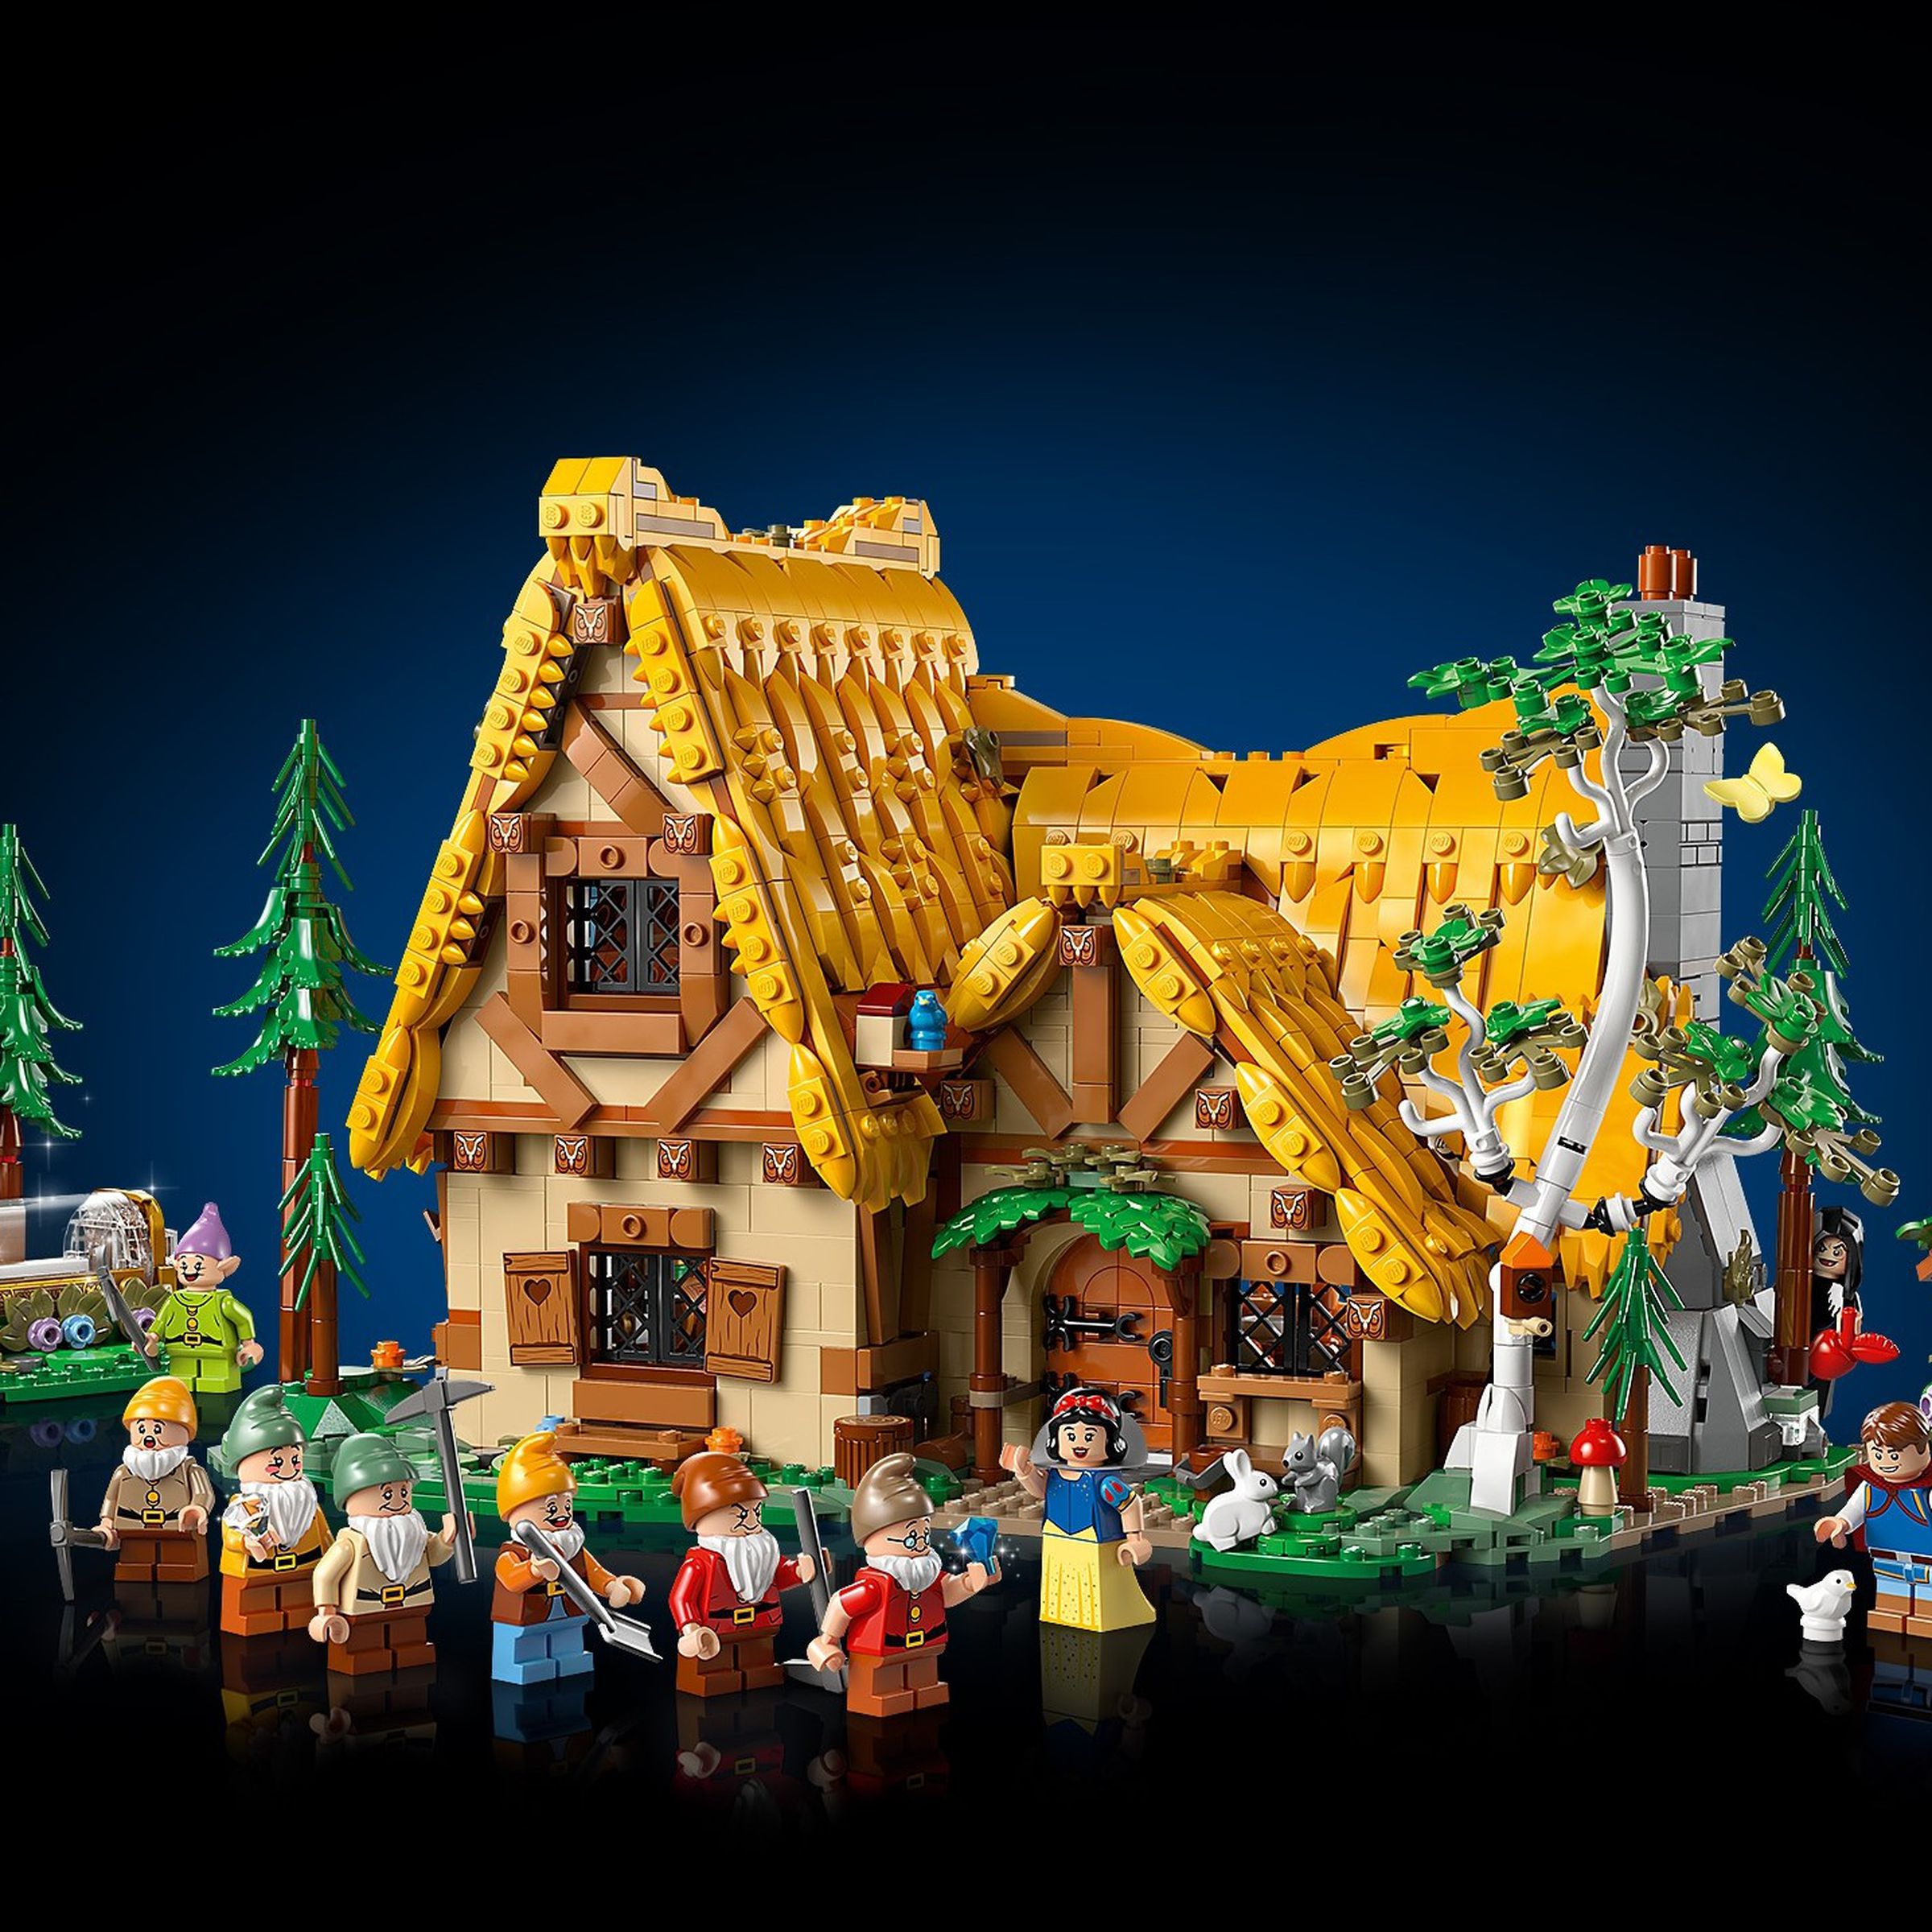 The new Snow White and the Seven Dwarfs Lego set.